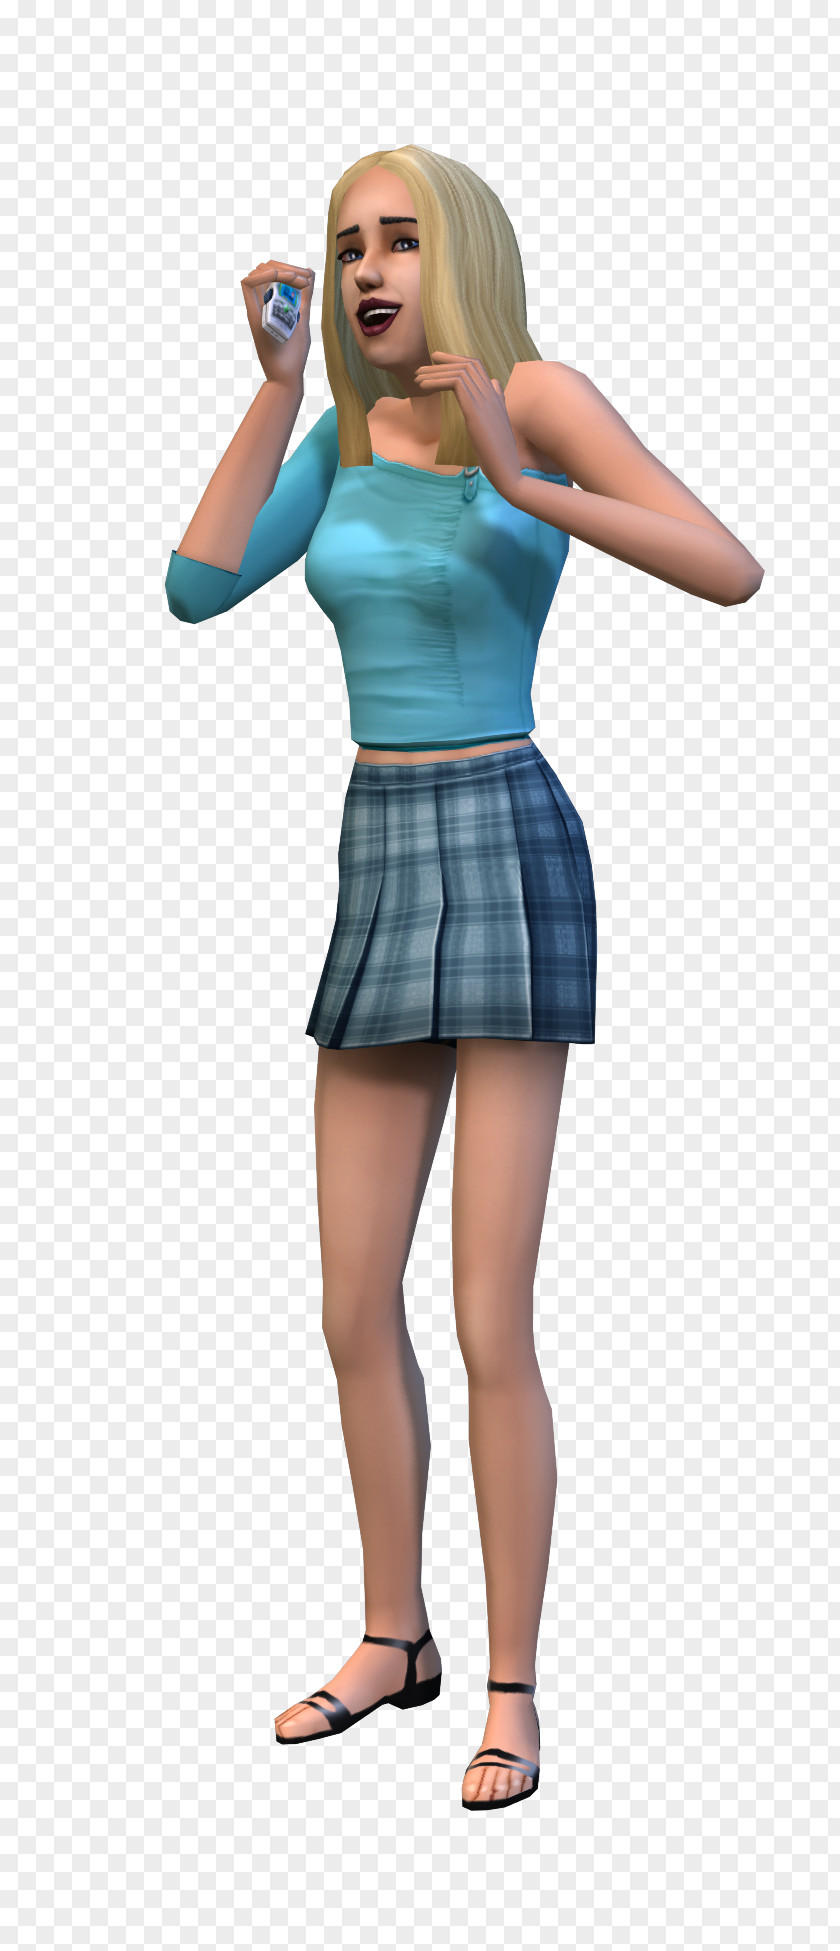 Sims The 2: University 4 Expansion Pack PNG